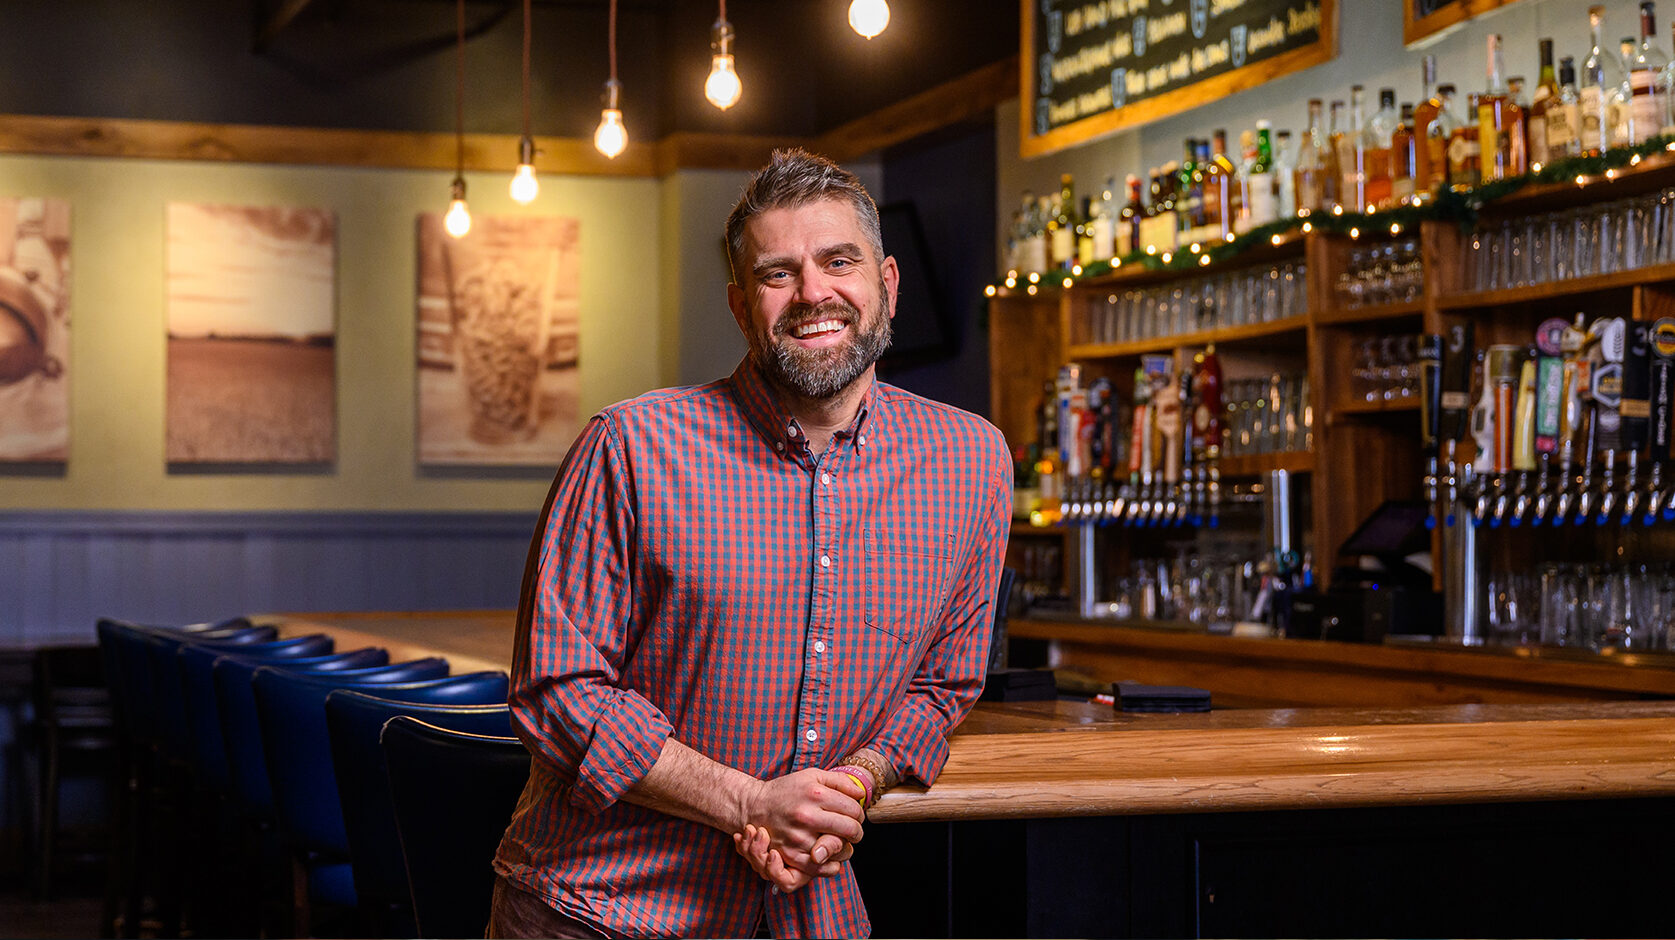 Wisconsin Foodie host Luke Zahm leans against a bar in a red plaid shirt, smiling